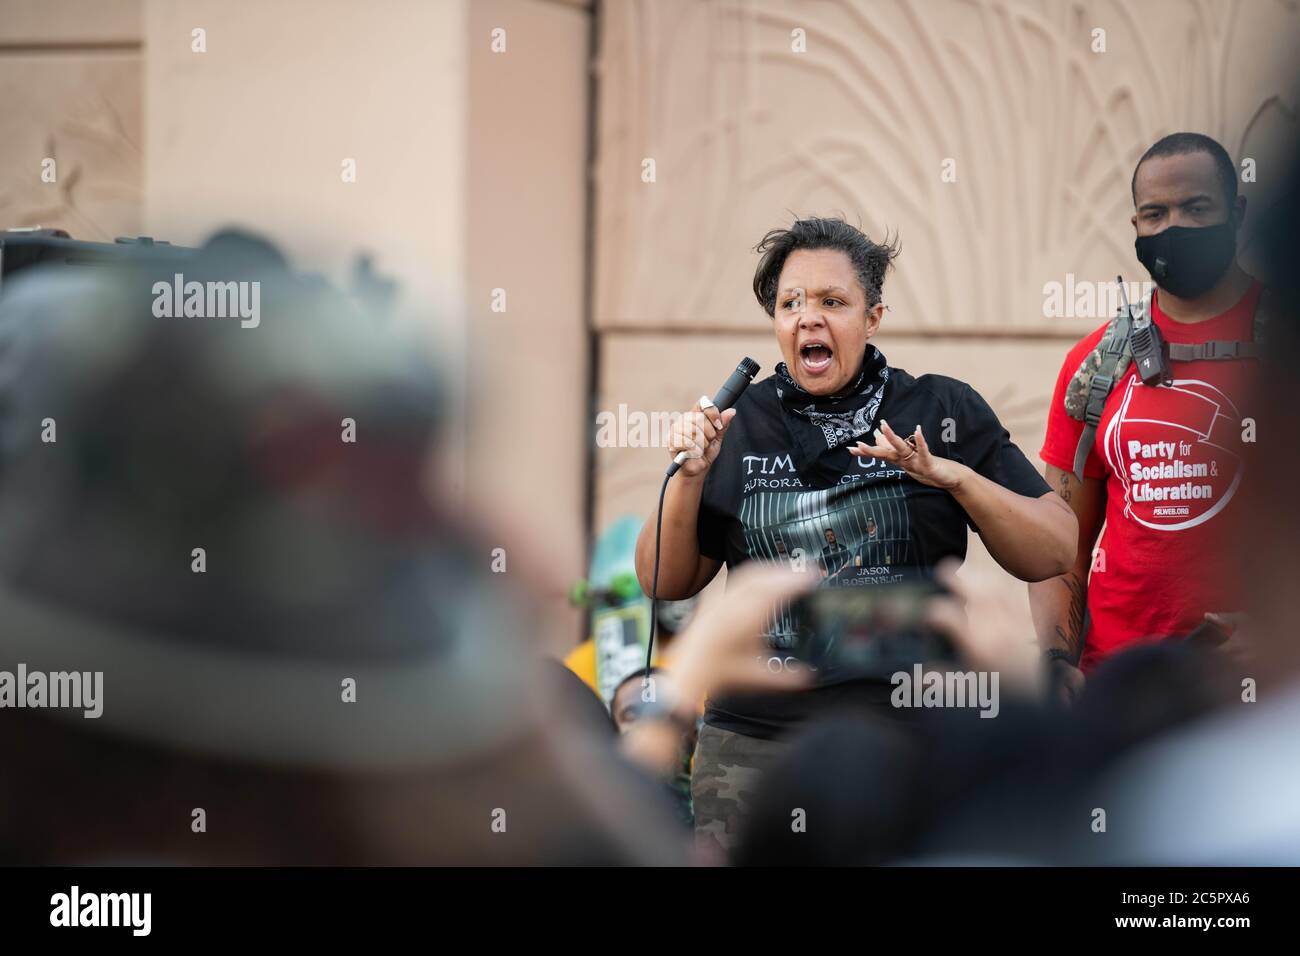 Aurora, Colorado, USA. 3rd July, 2020. McClain family friend, Candace Bailey, pumps up a crowd before a march in Aurora, Colorado on Friday July 3rd, 2020 Credit: Tyler Tomasello/ZUMA Wire/Alamy Live News Stock Photo